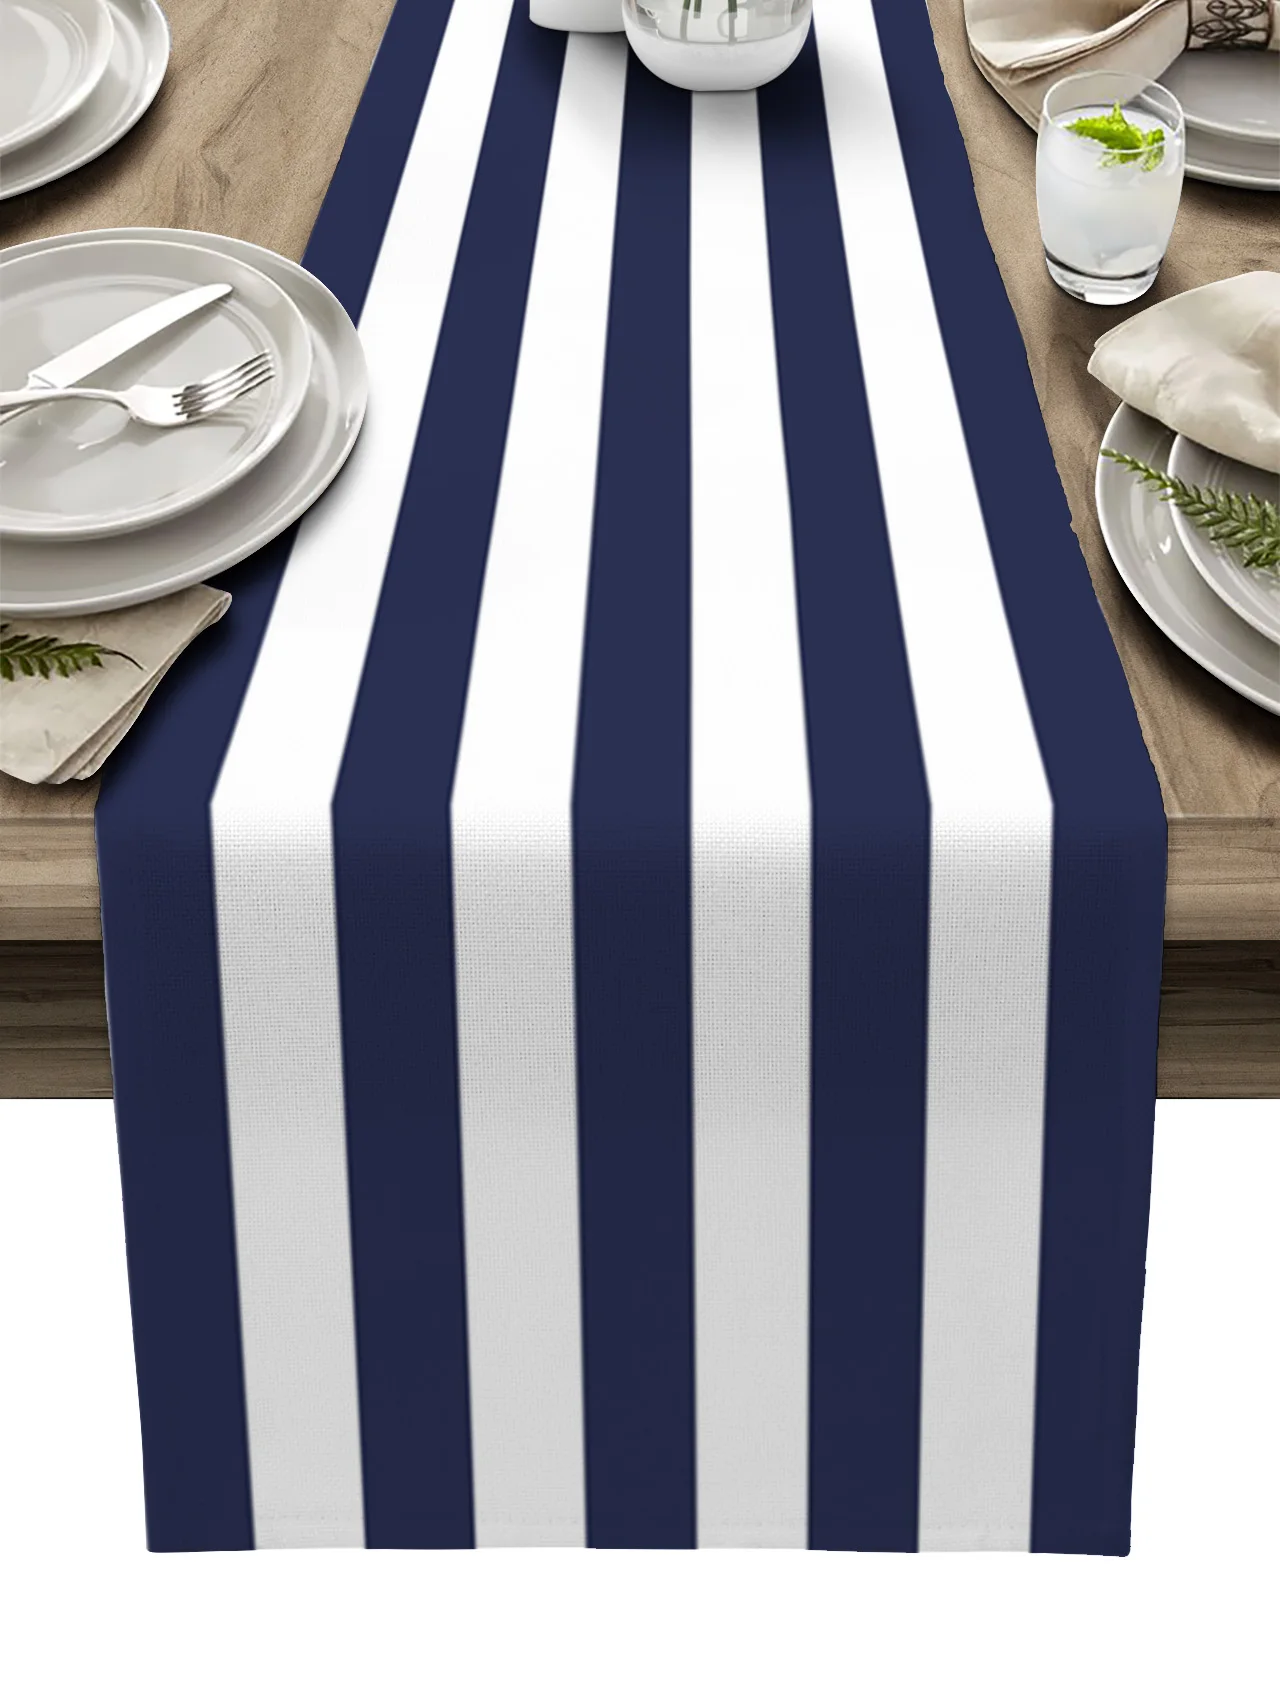 

Navy Blue White Stripes Table Runner Home Party Decorative Tablecloth Cotton Linen Table Runners for Wedding